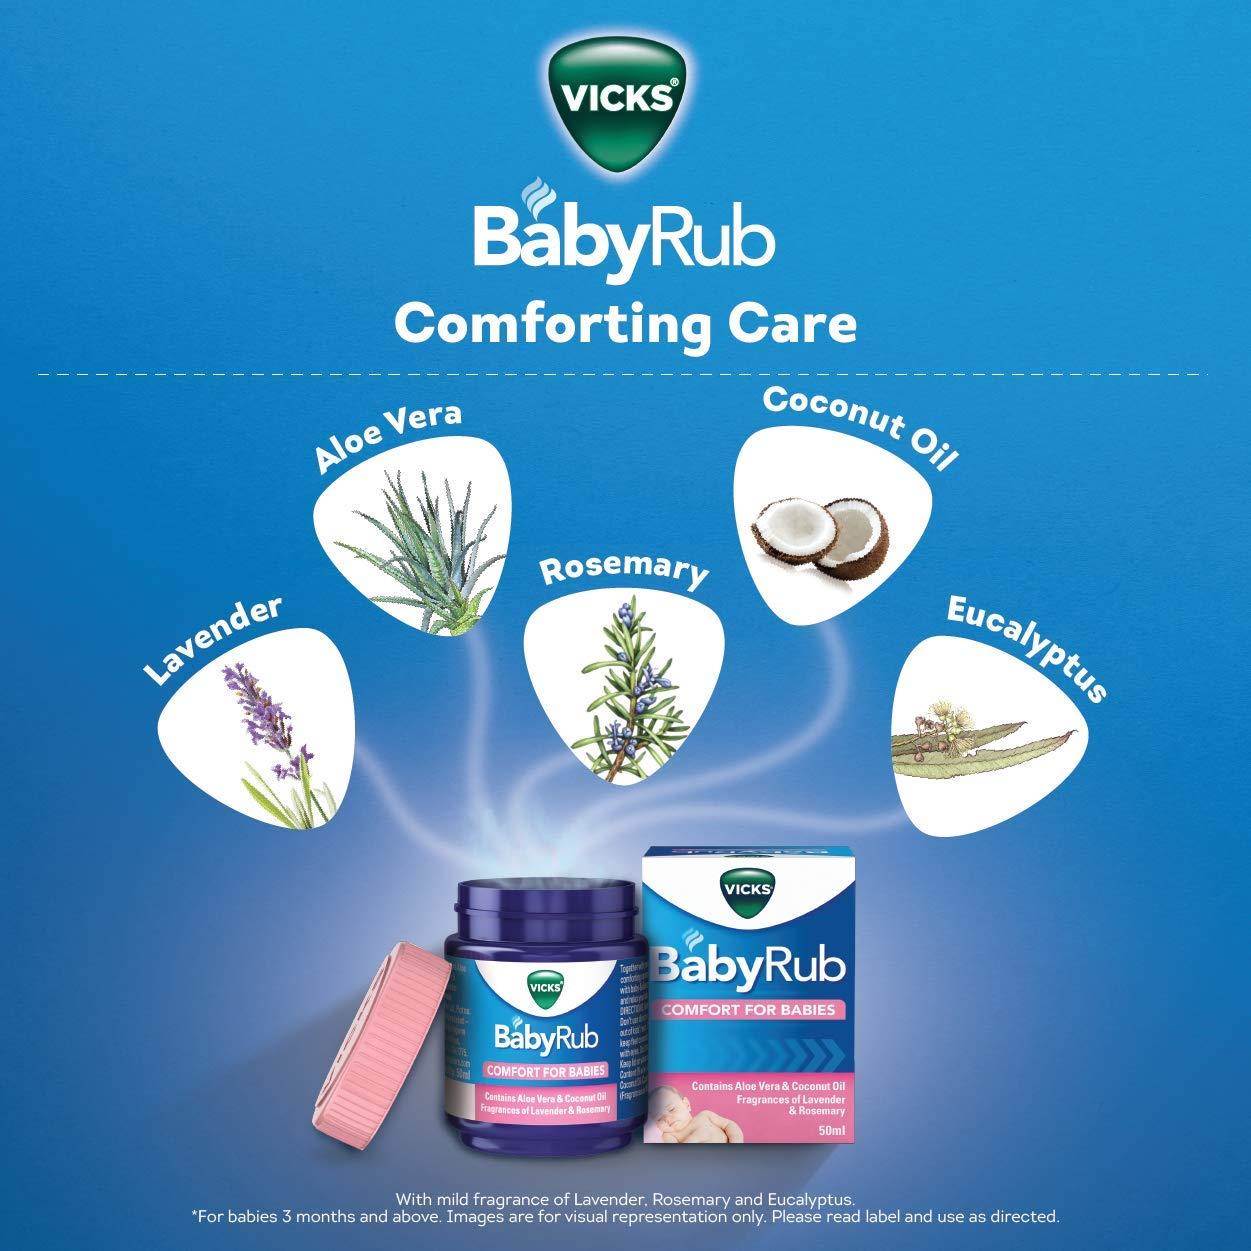 Vicks for Baby: Is It Safe?